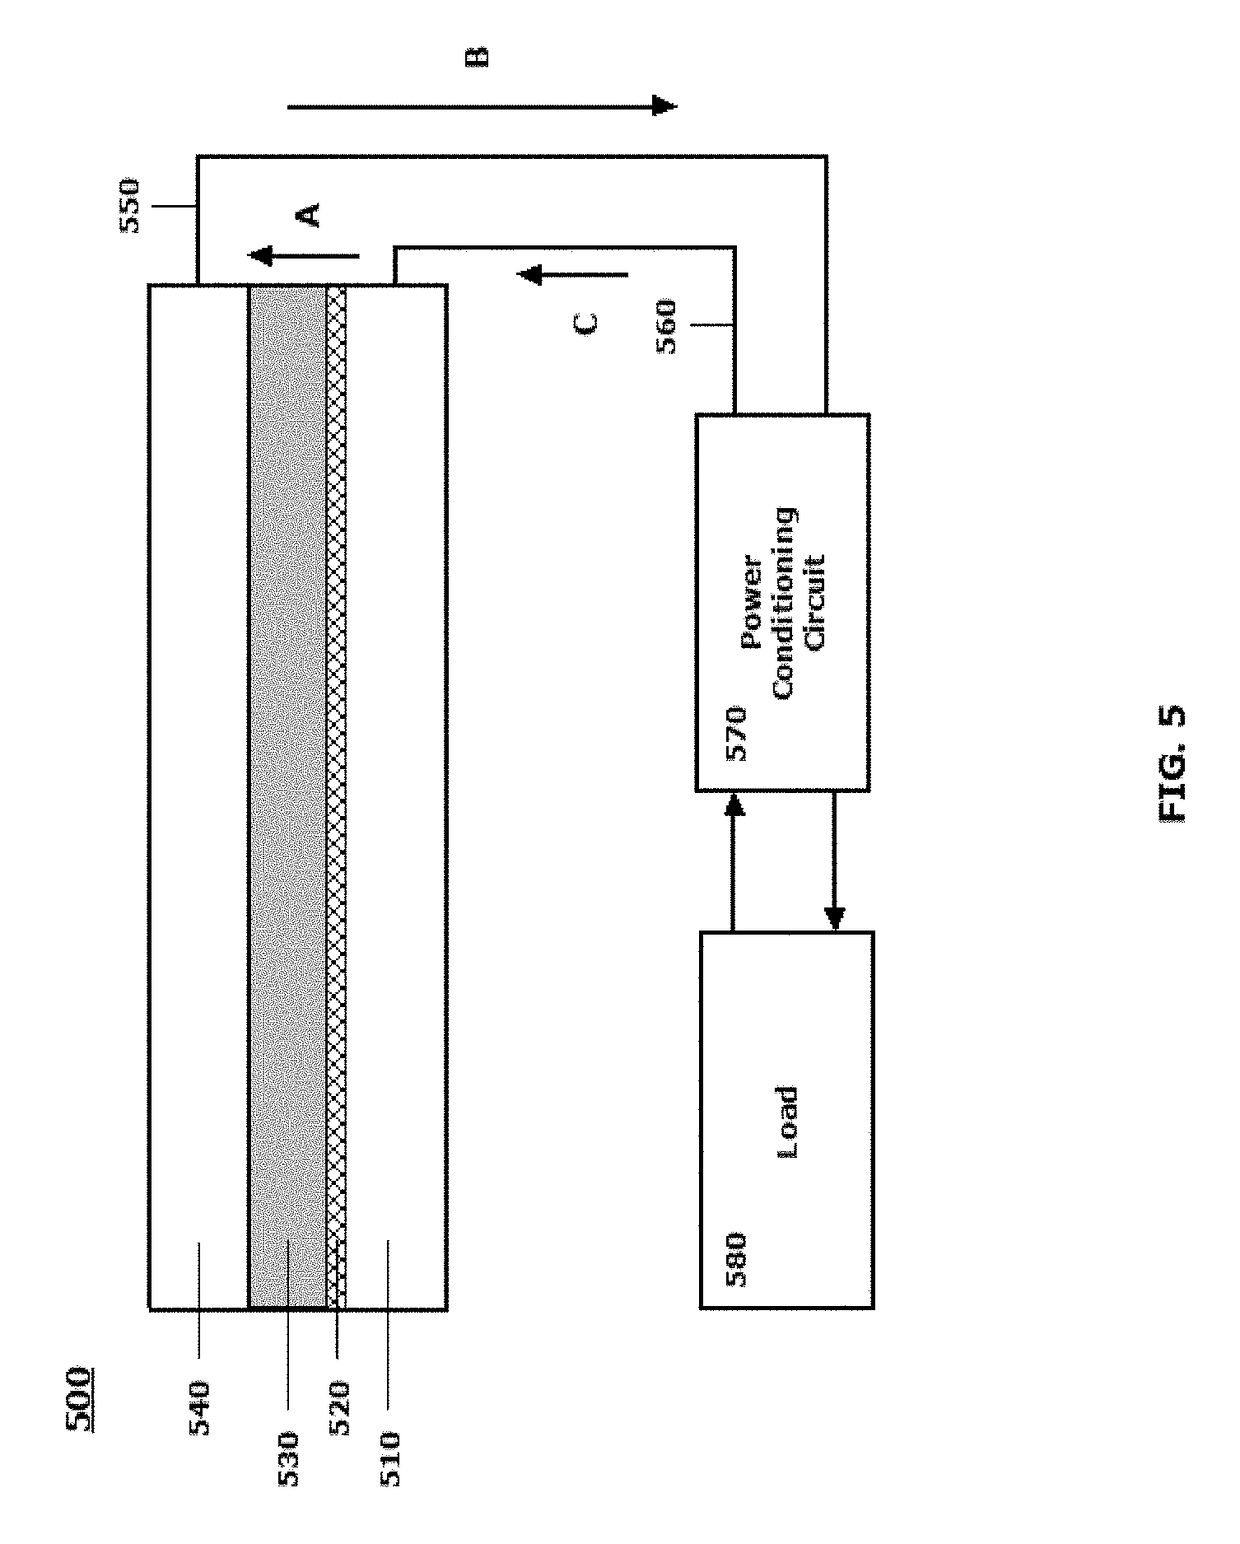 Devices and systems incorporating energy harvesting components/devices as autonomous energy sources and as energy supplementation, and methods for producing devices and systems incorporating energy harvesting components/devices